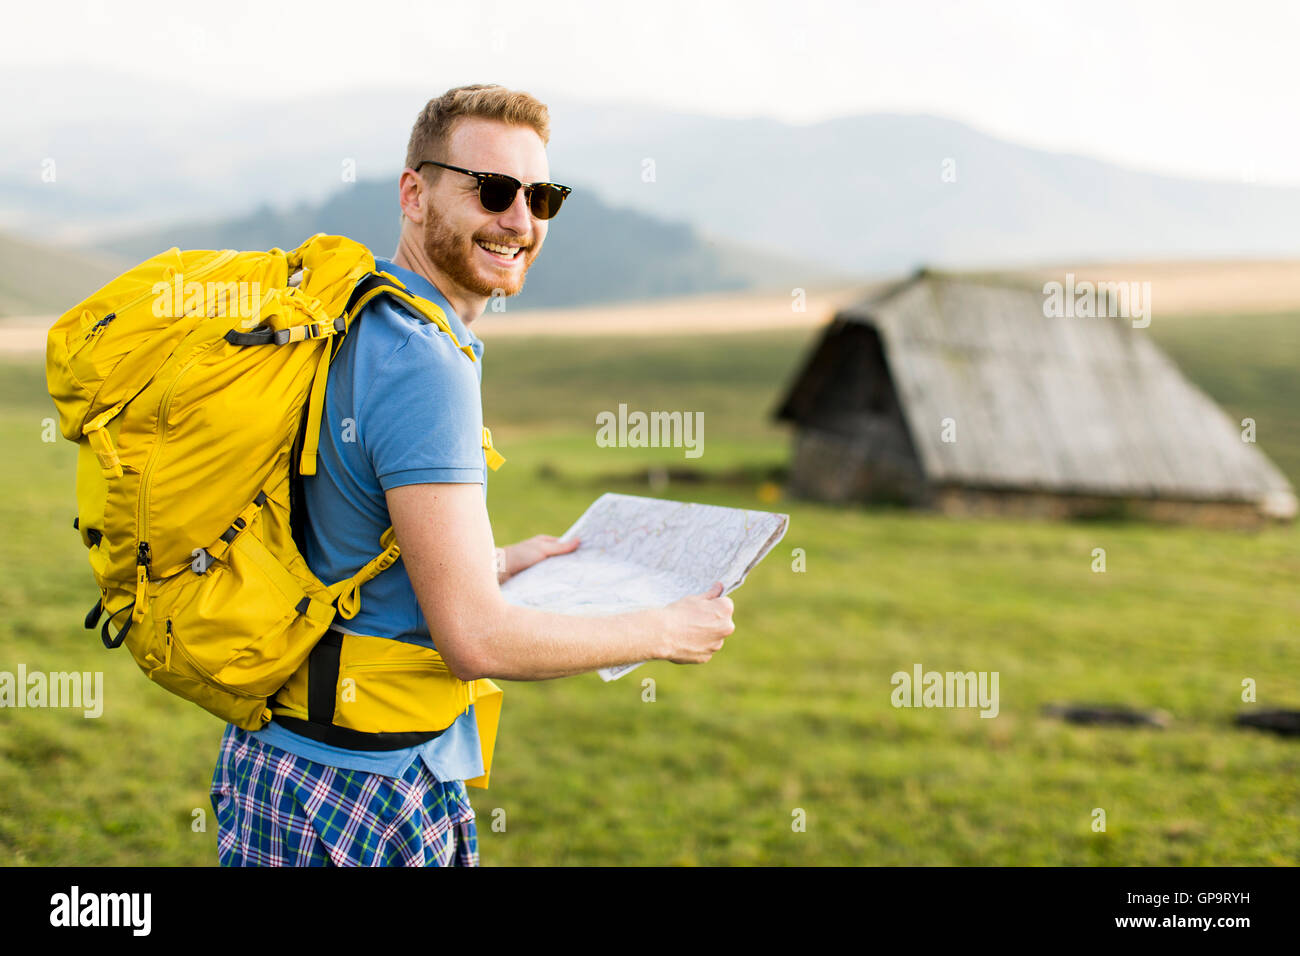 Young redhair man on mountain hiking holding a map Stock Photo